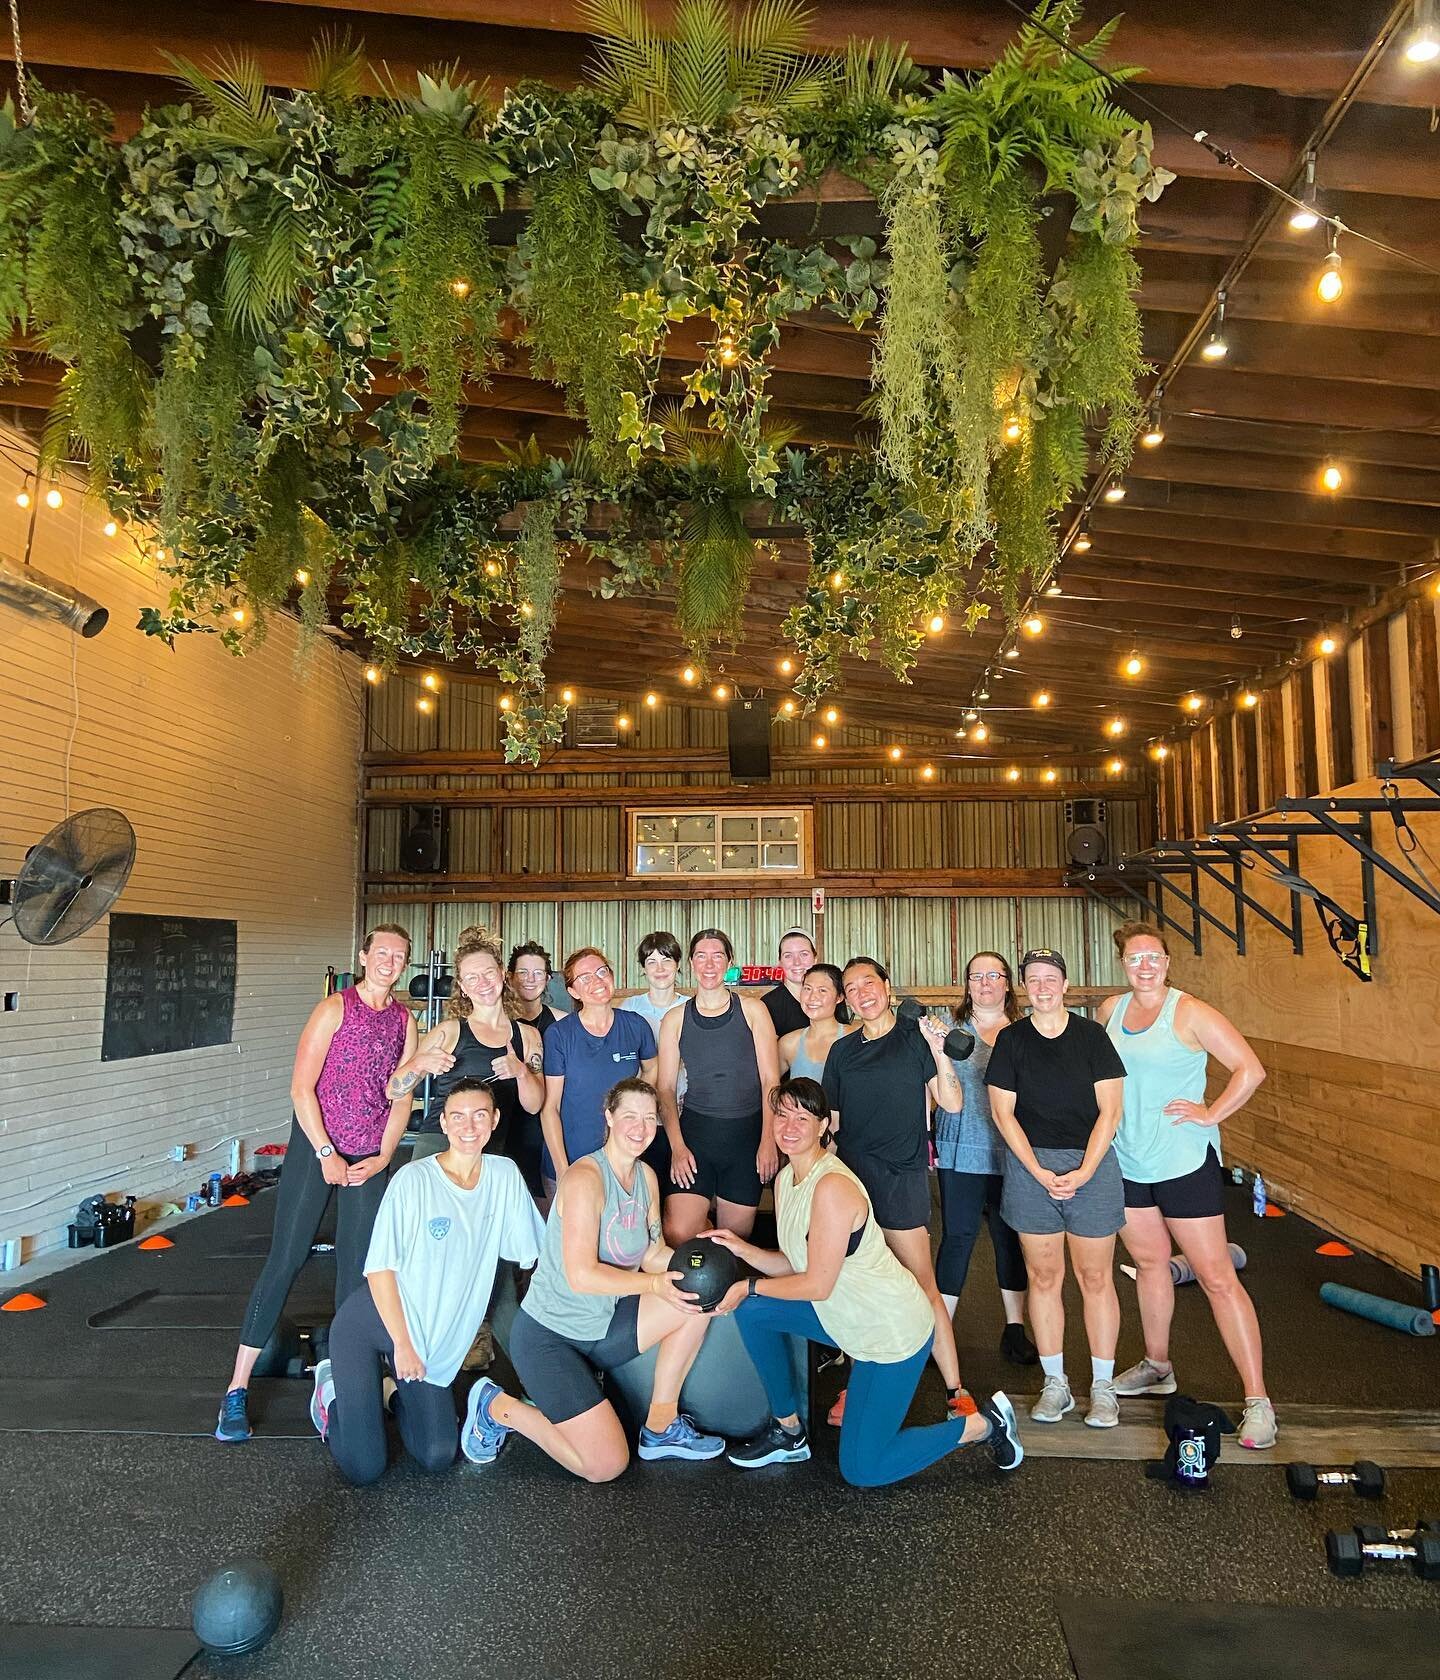 September is a go!

People are back from their vacation and ready to start moving their bodies again. 

Are you?

Stoked to see so many wonderful faces this am.

Have an amazing long weekend crew.